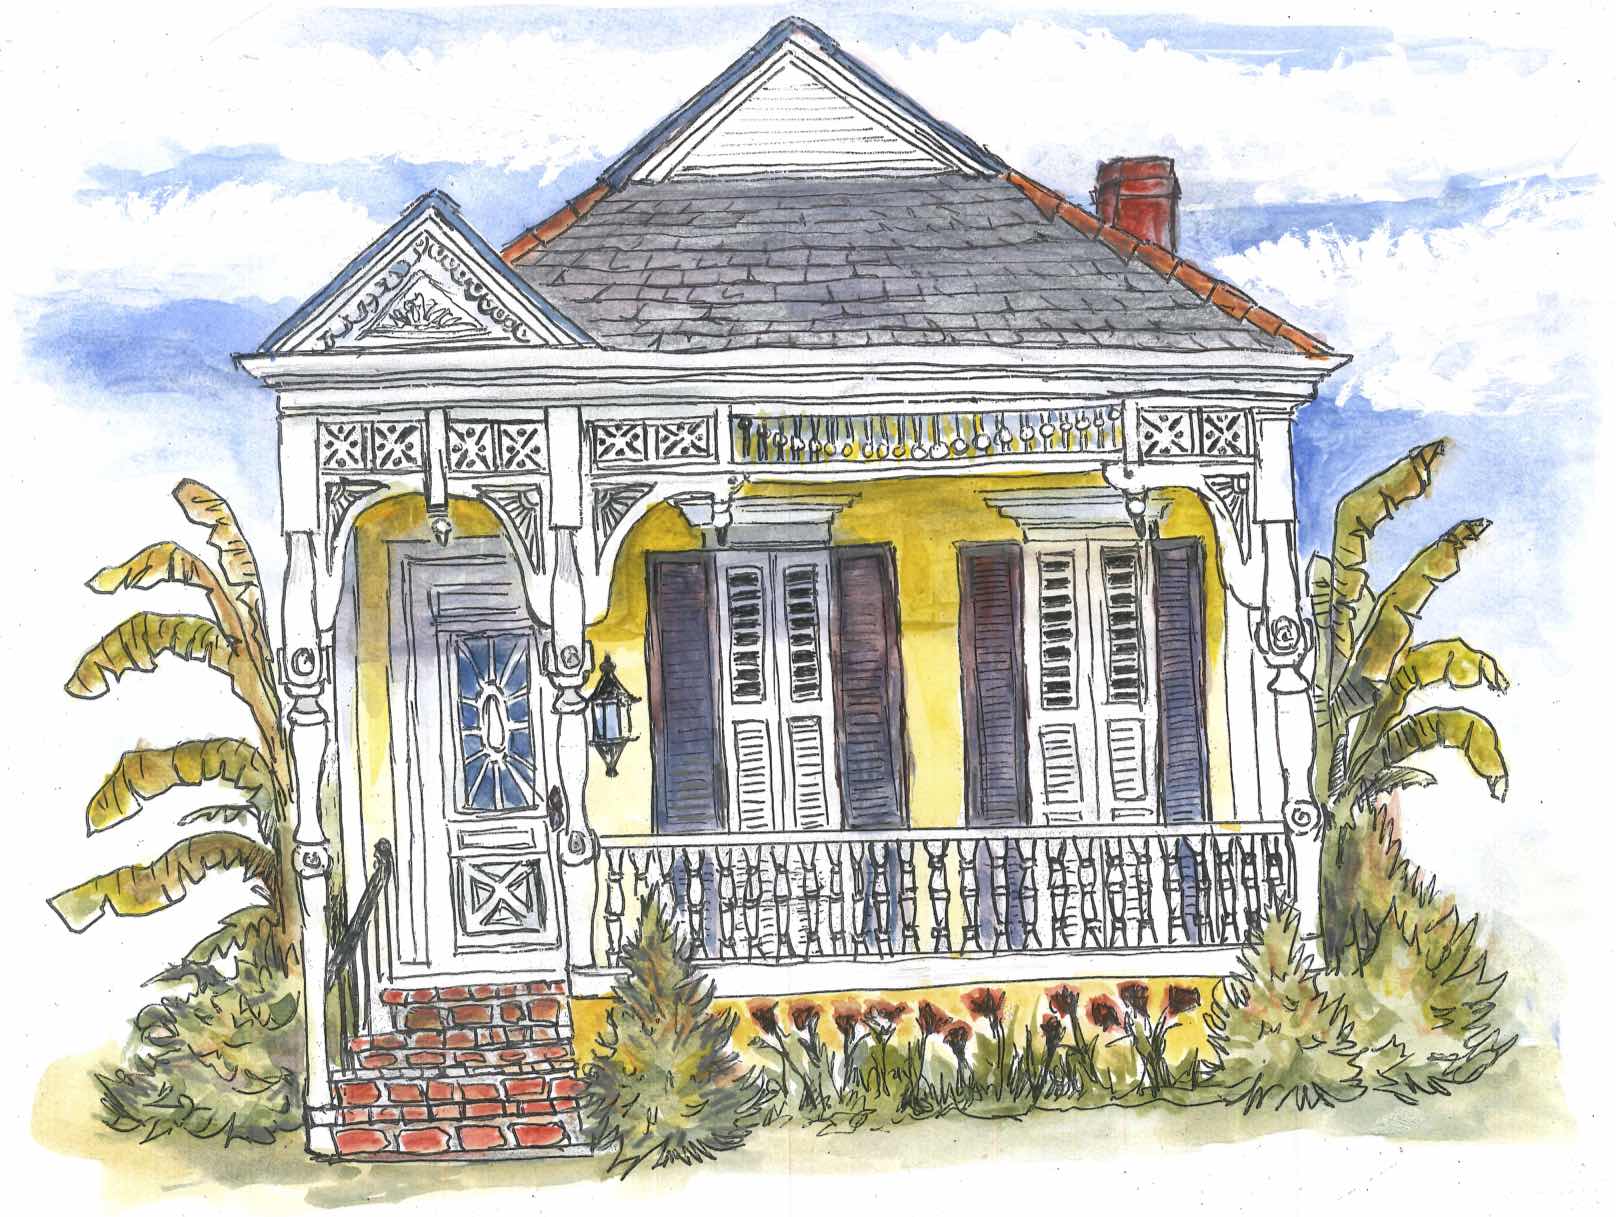 NEW ORLEANS - YELLOW ONE STORY HOUSE IN MARIGNY, NEW ORLEANS